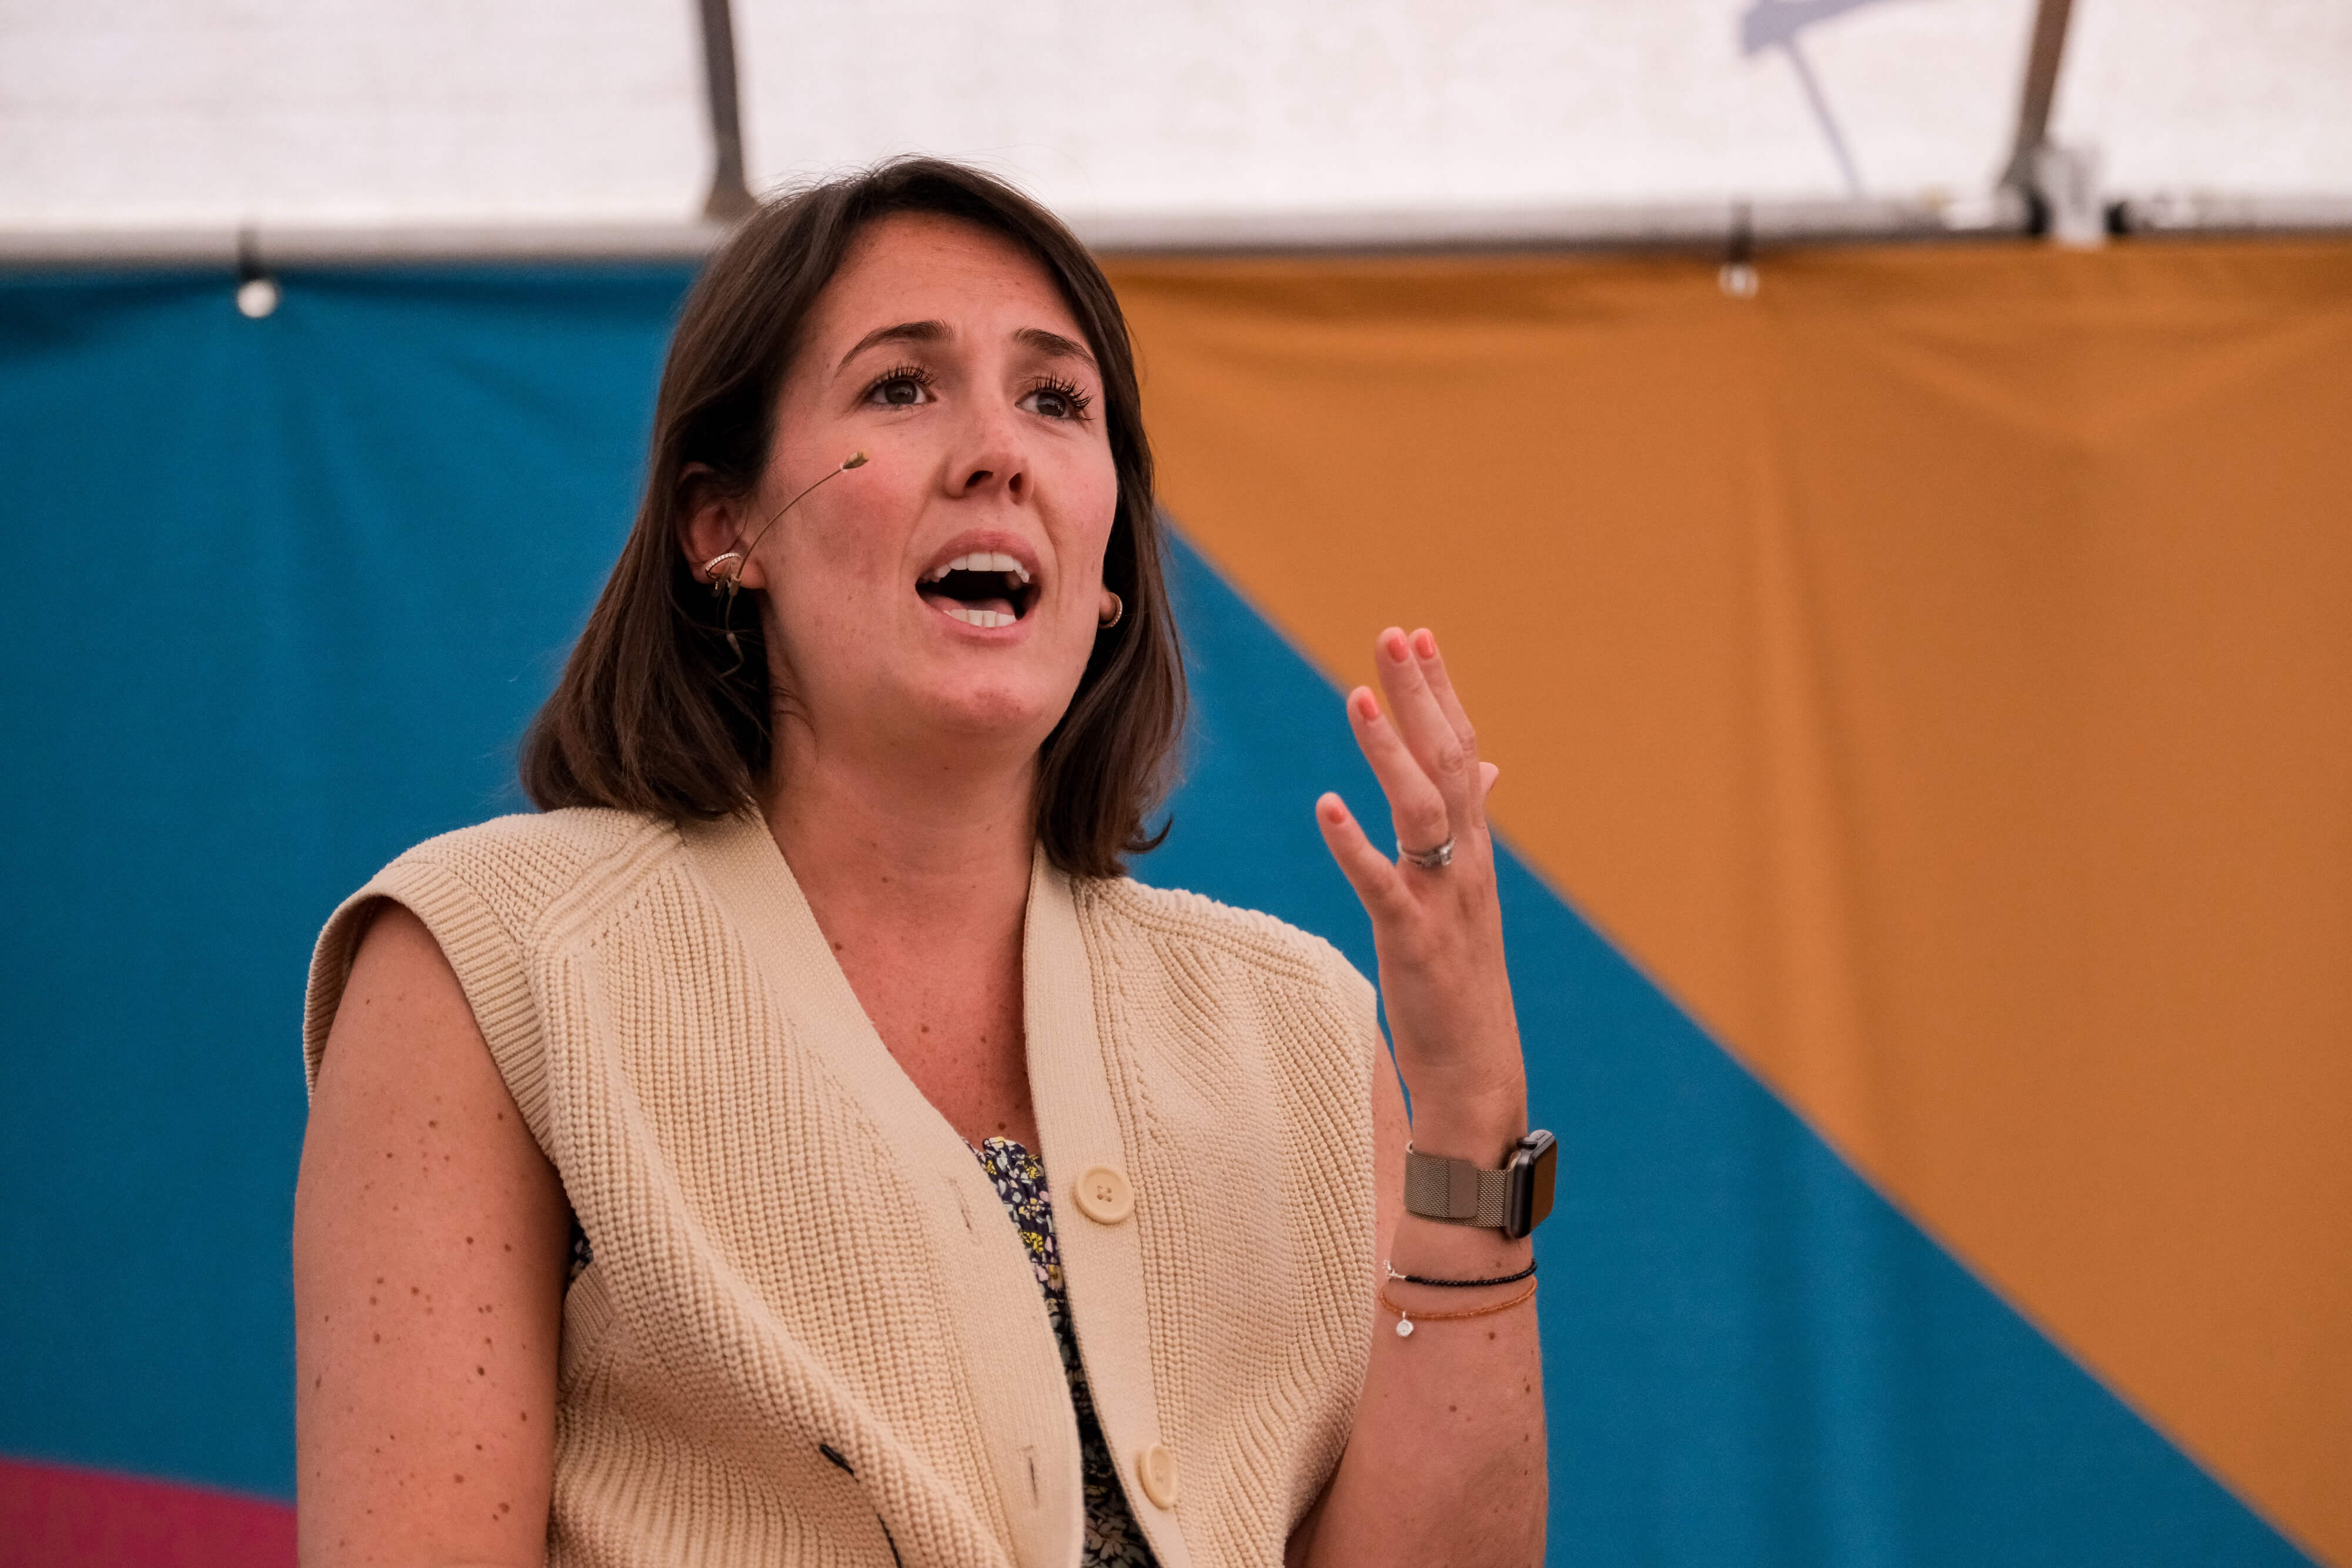 A woman speaking with a hands-free microphone